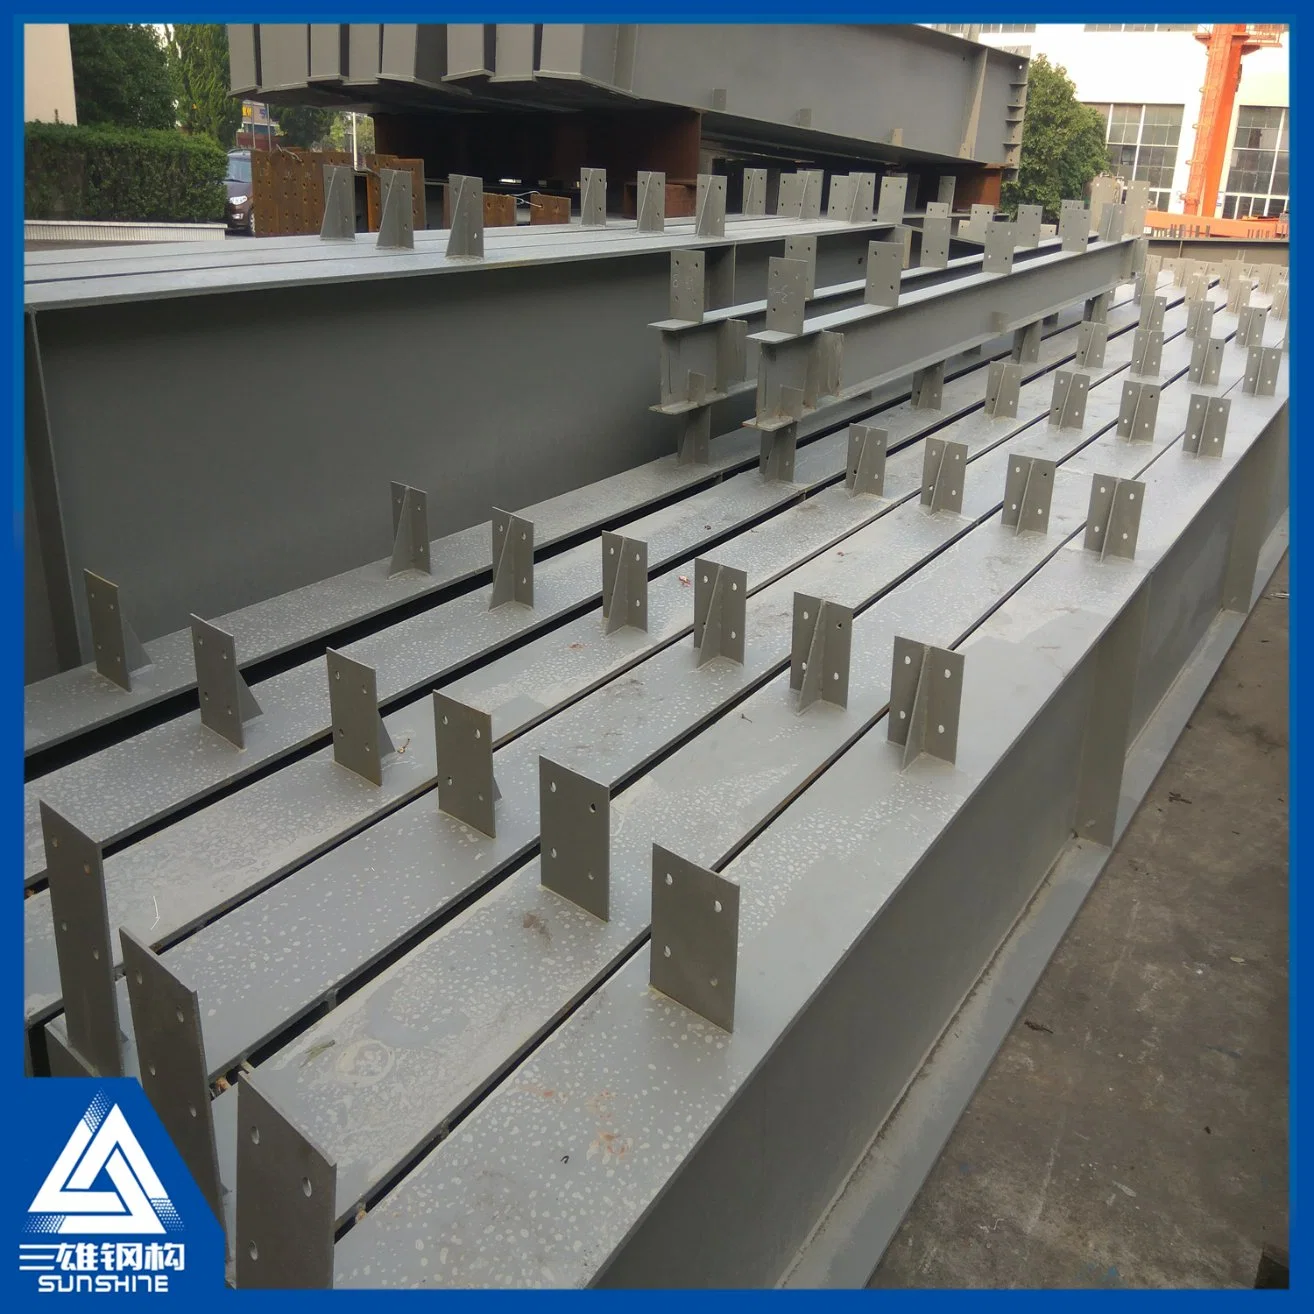 China Building Material Prefabricated Light Steel Structure for Warehouse/Workshop/Cow Shed/Chicken House